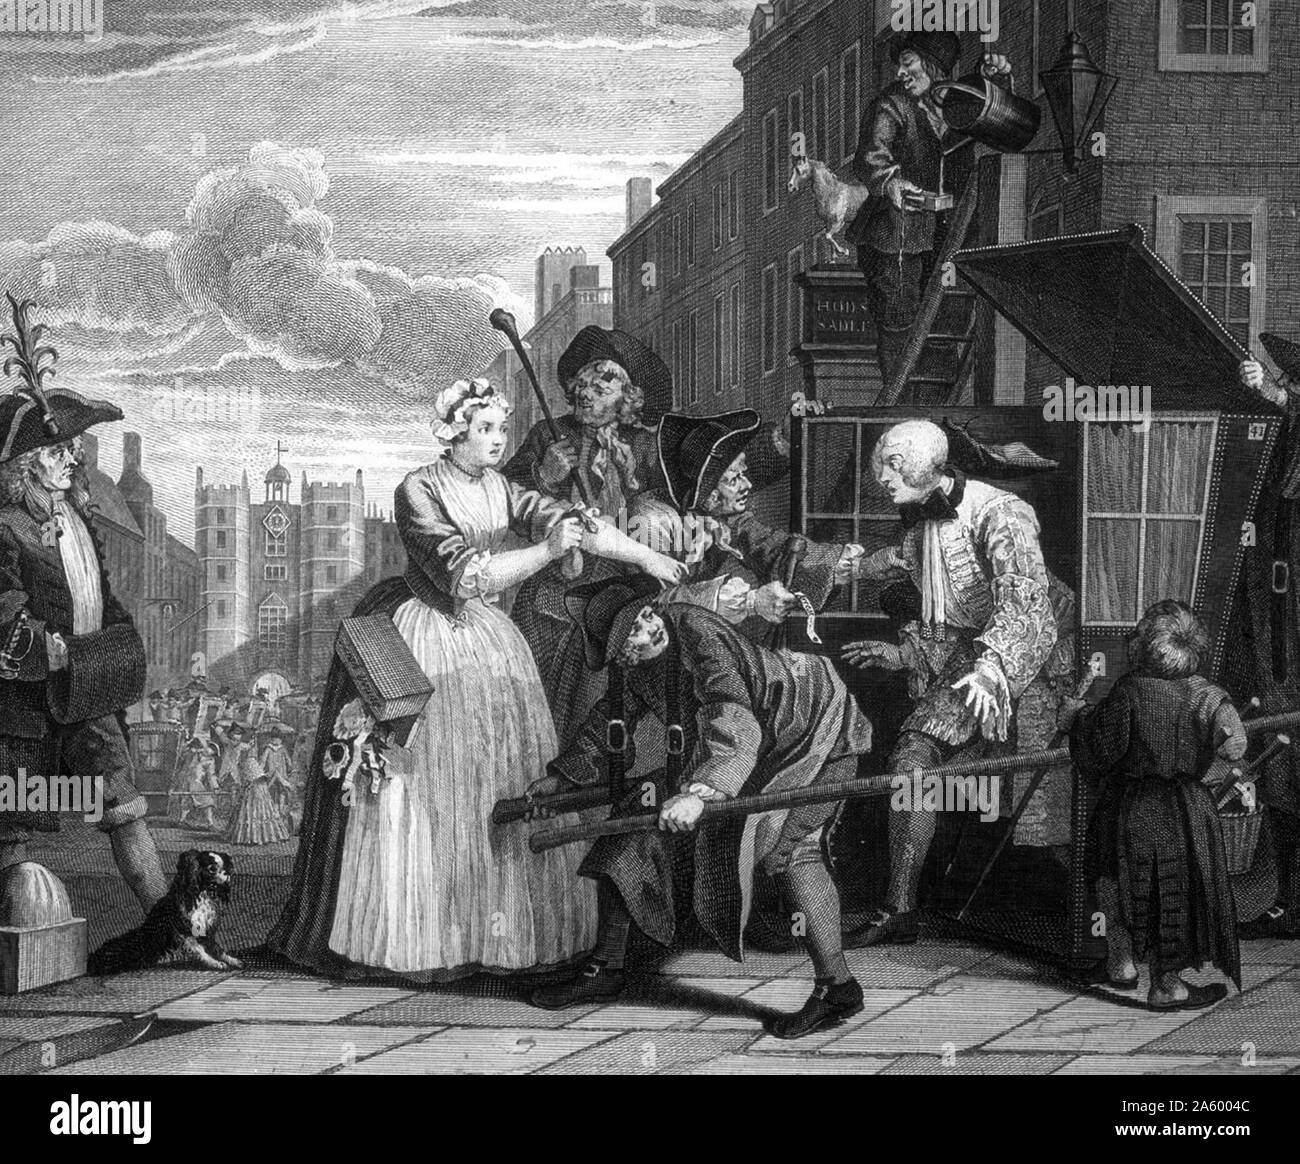 Arrested For Debt. from 'A Rake's Progress' 1735, By William Hogarth (1697 – 1764). English painter, printmaker, satirist. The series shows the decline and fall of Tom Rakewell, the spendthrift son and heir of a rich merchant, who comes to London, wastes all his money on luxurious living, prostitution and gambling Stock Photo